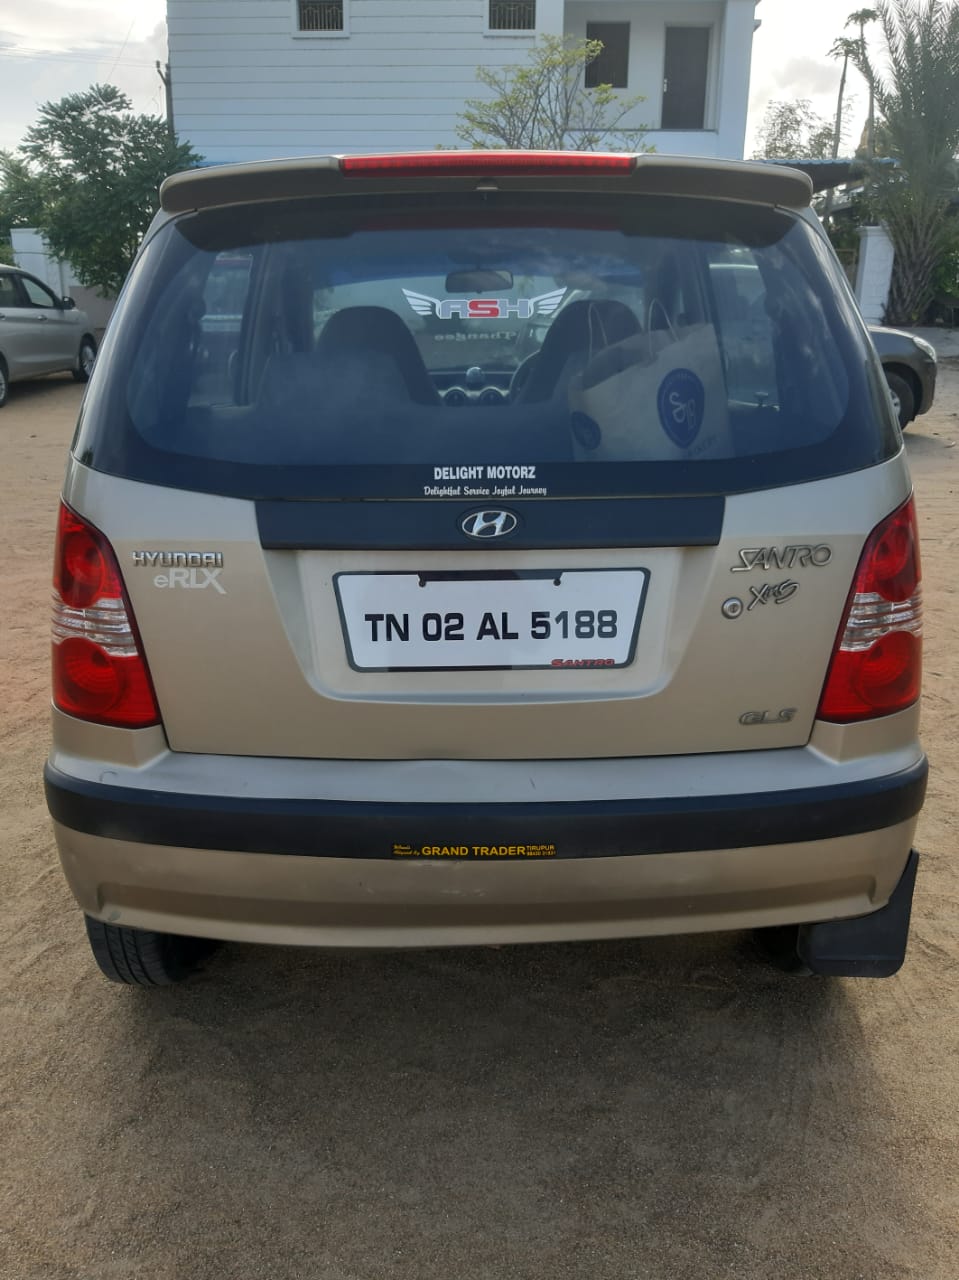 3879-for-sale-Hyundai-Santro-Xing-Petrol-First-Owner-2010-TN-registered-rs-225000